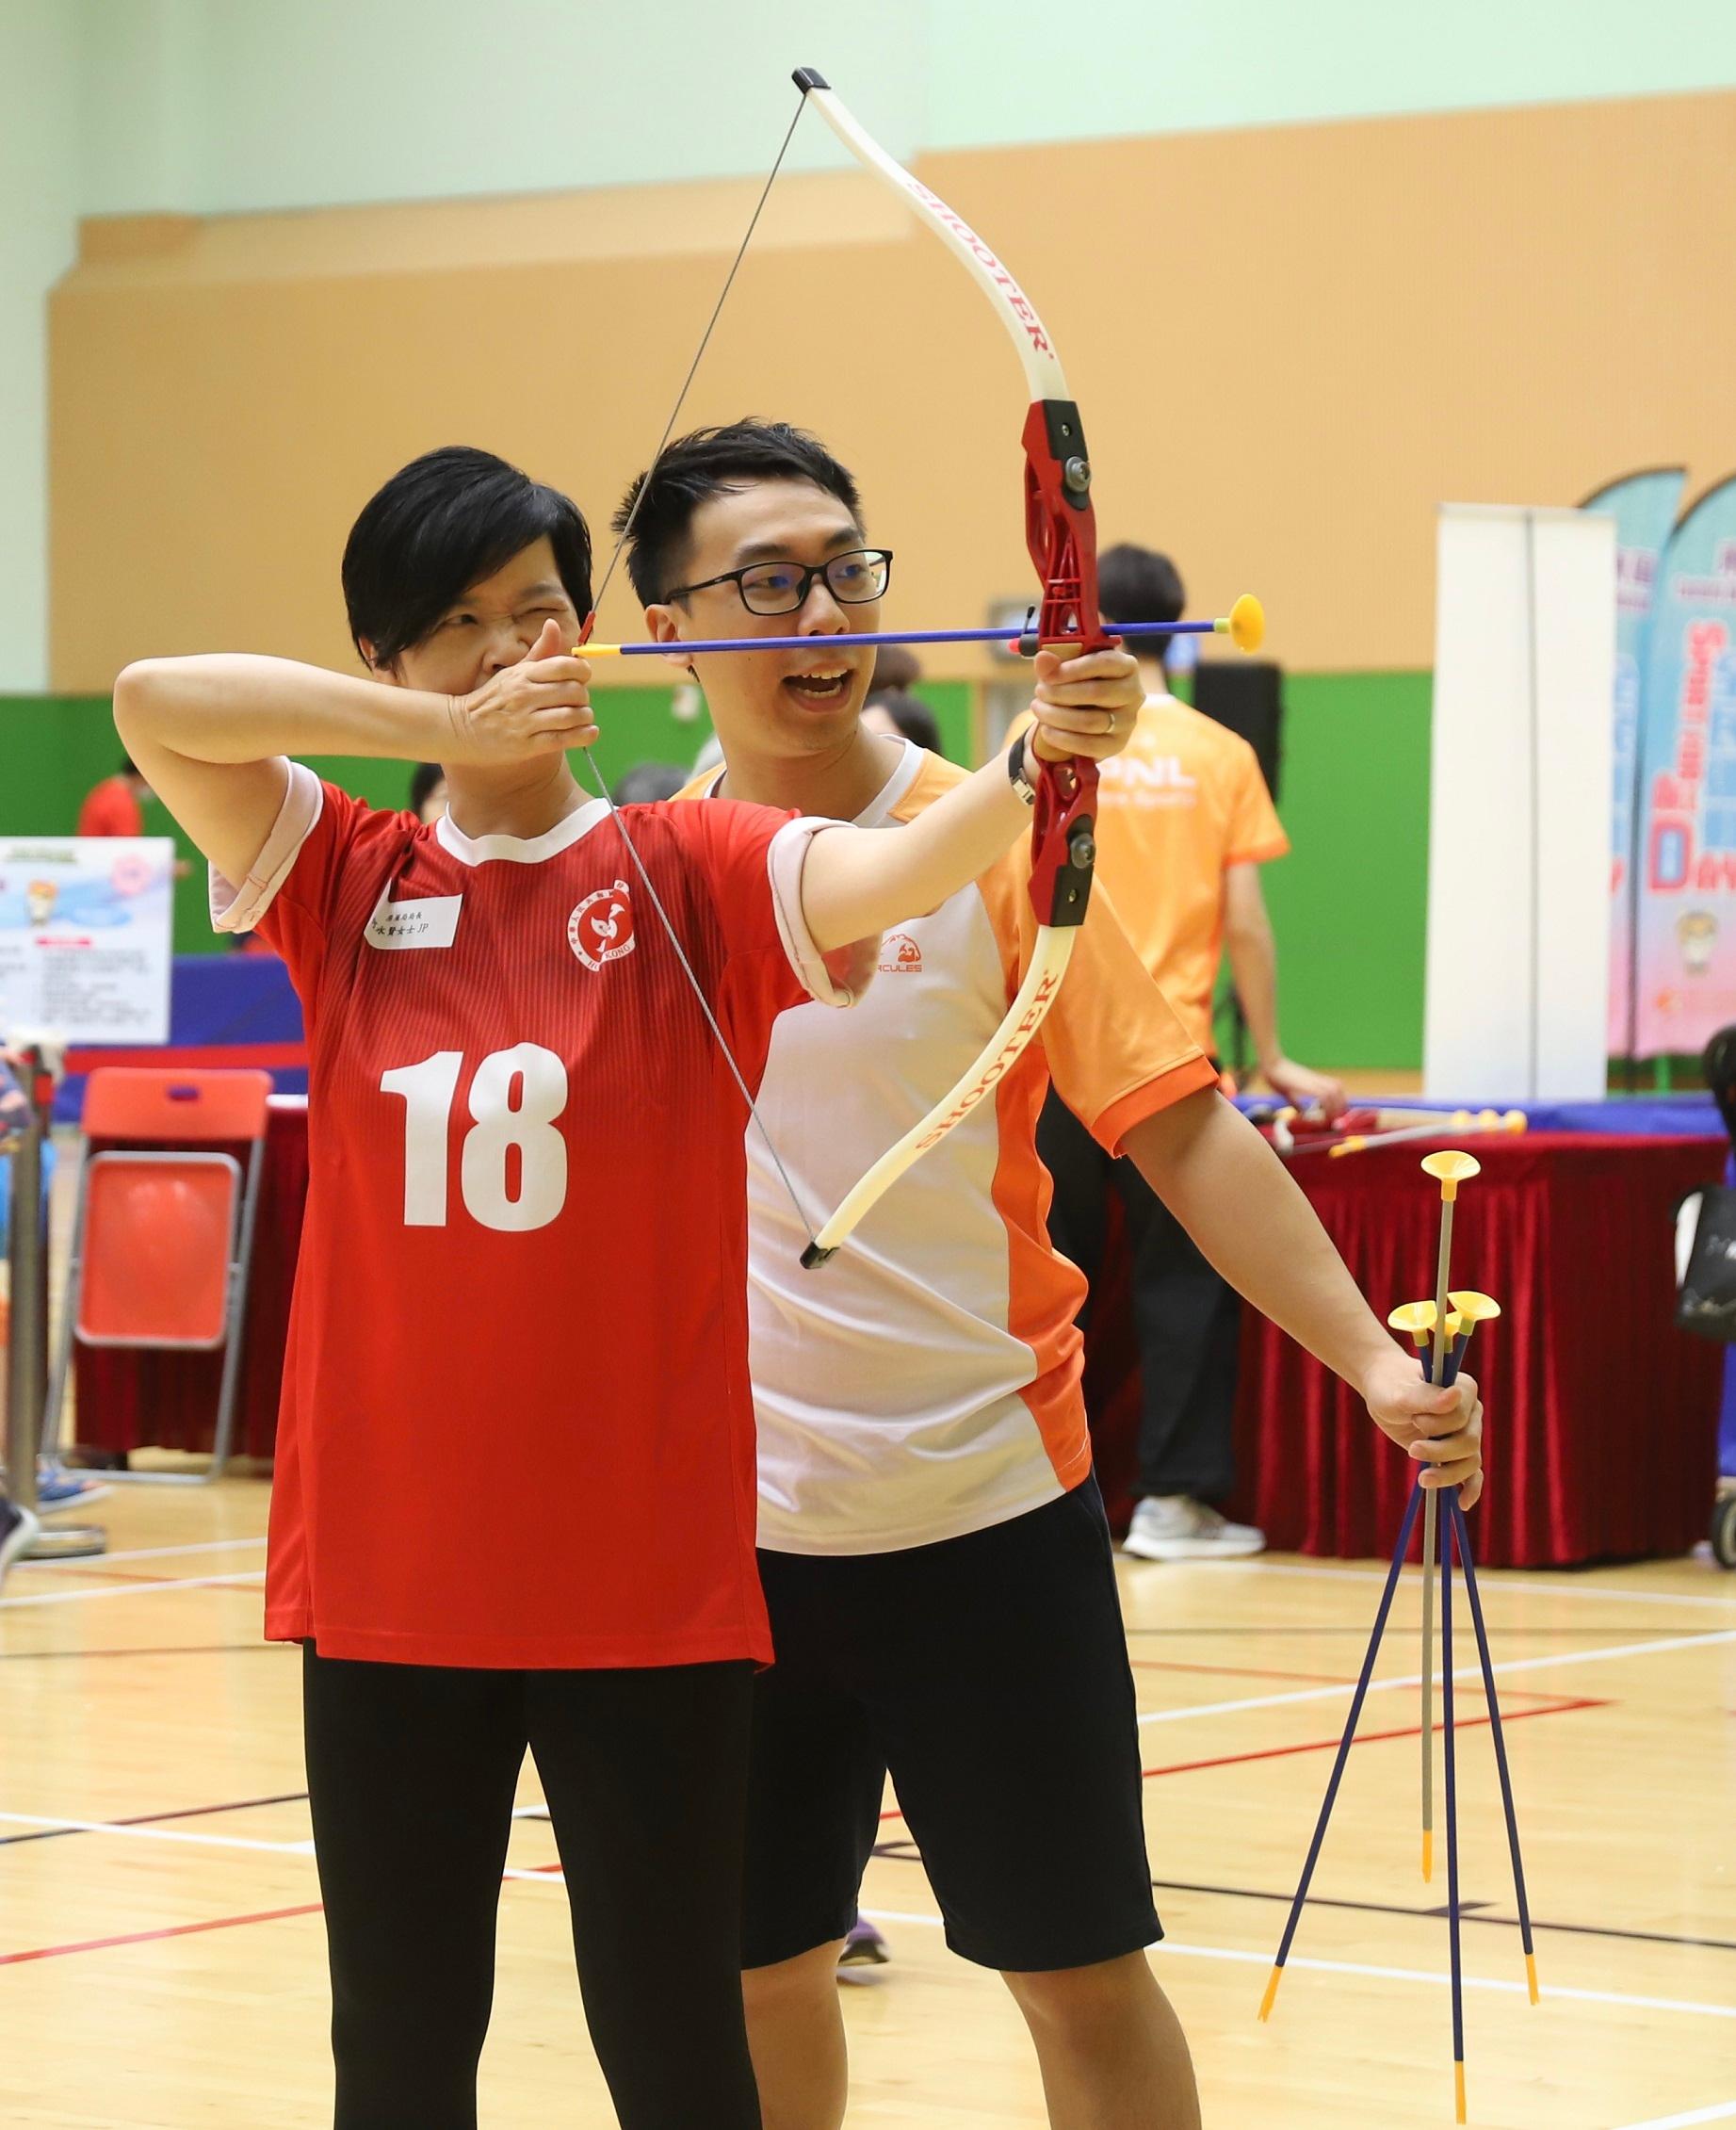 The Secretary for Housing, Ms Winnie Ho, supported and joined the recreation activities as part of the Sport For All Day 2023 organised by the Leisure and Cultural Services Department at Island East Sports Centre this afternoon (August 6).
